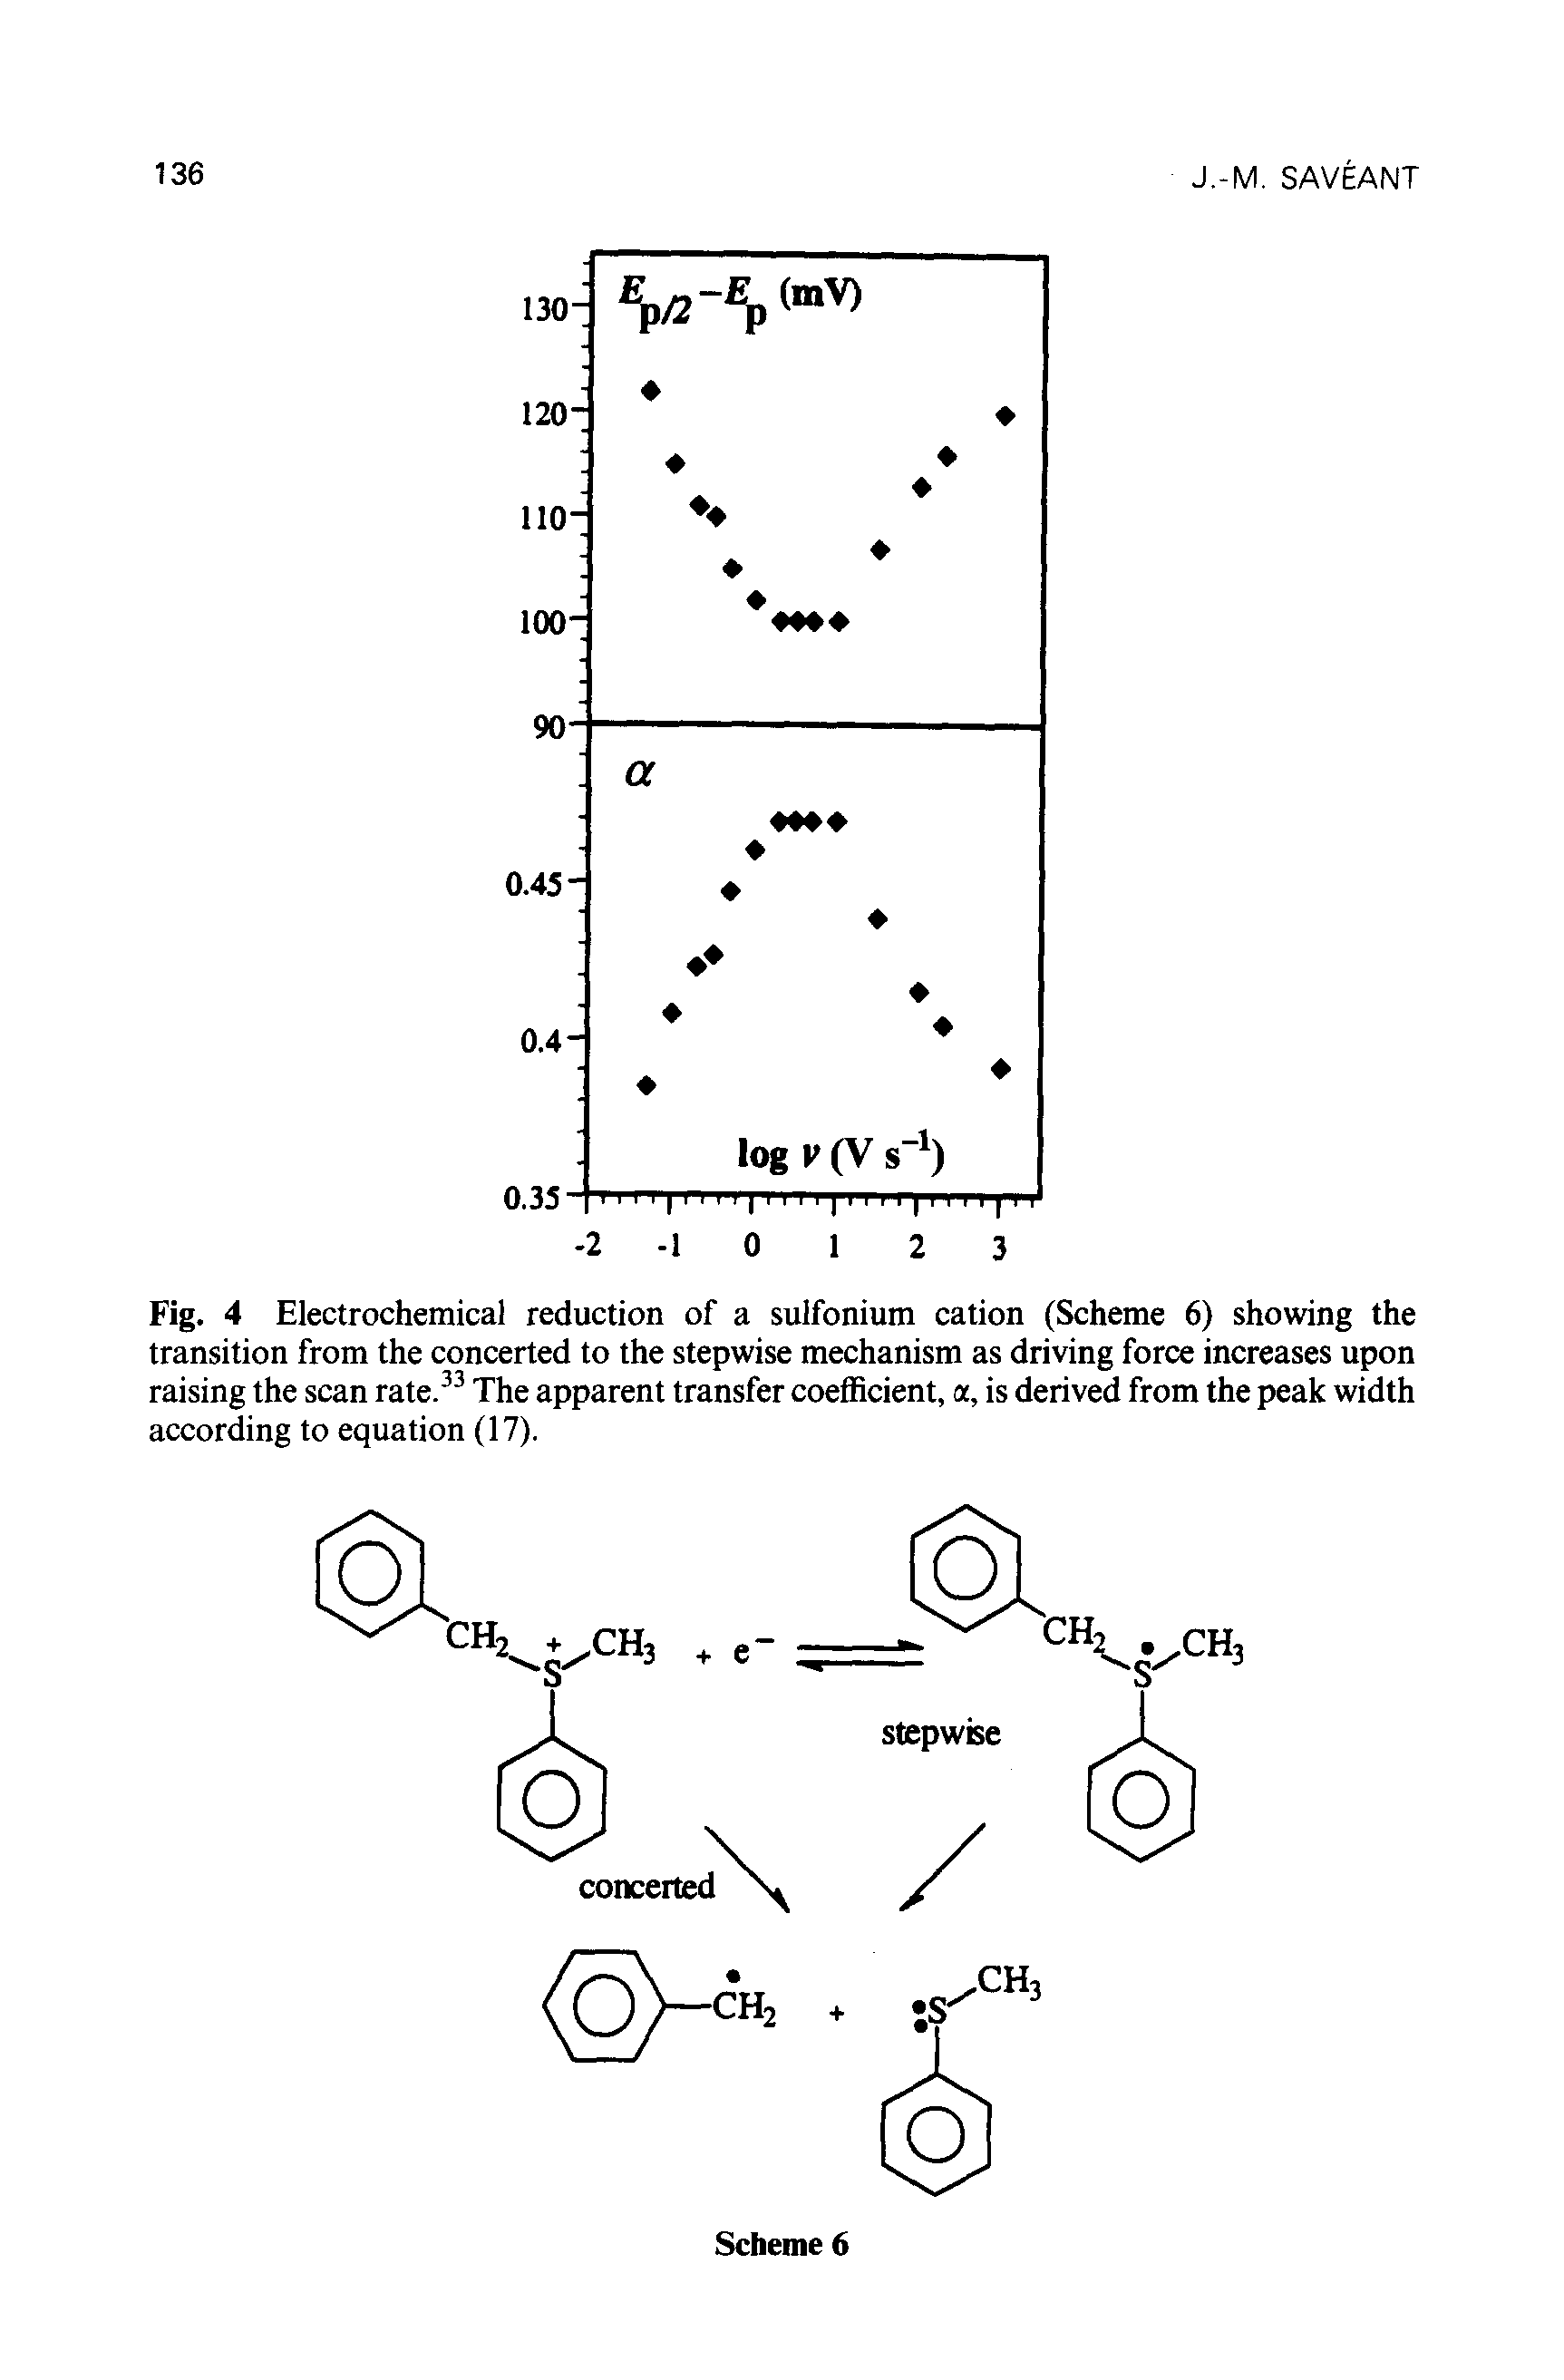 Fig. 4 Electrochemical reduction of a sulfonium cation (Scheme 6) showing the transition from the concerted to the stepwise mechanism as driving force increases upon raising the scan rate.33 The apparent transfer coefficient, a, is derived from the peak width according to equation (17).